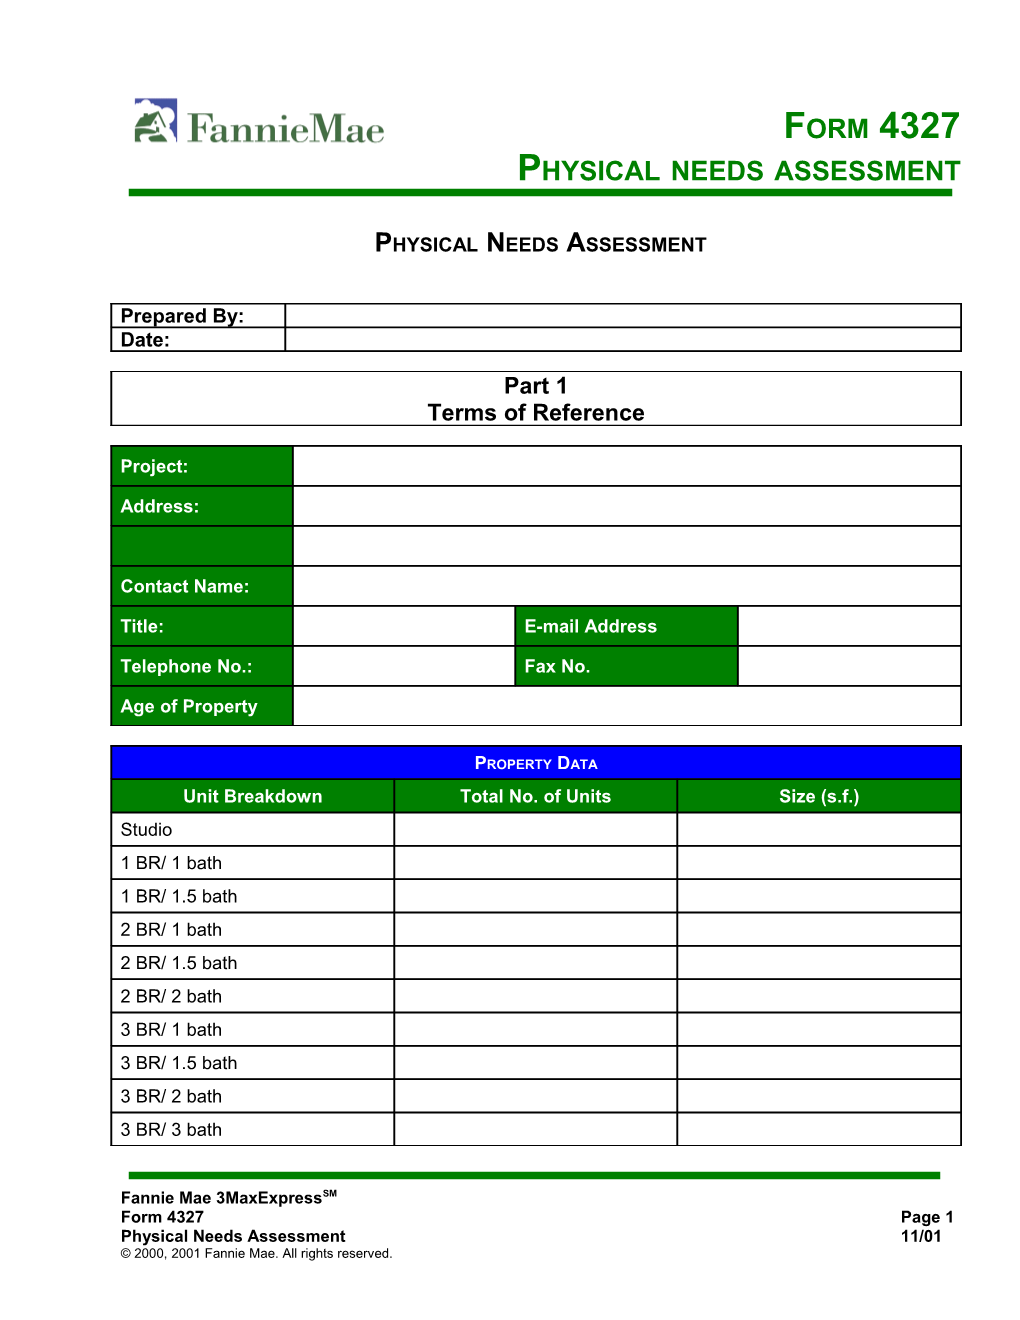 Physical Needs Assessment